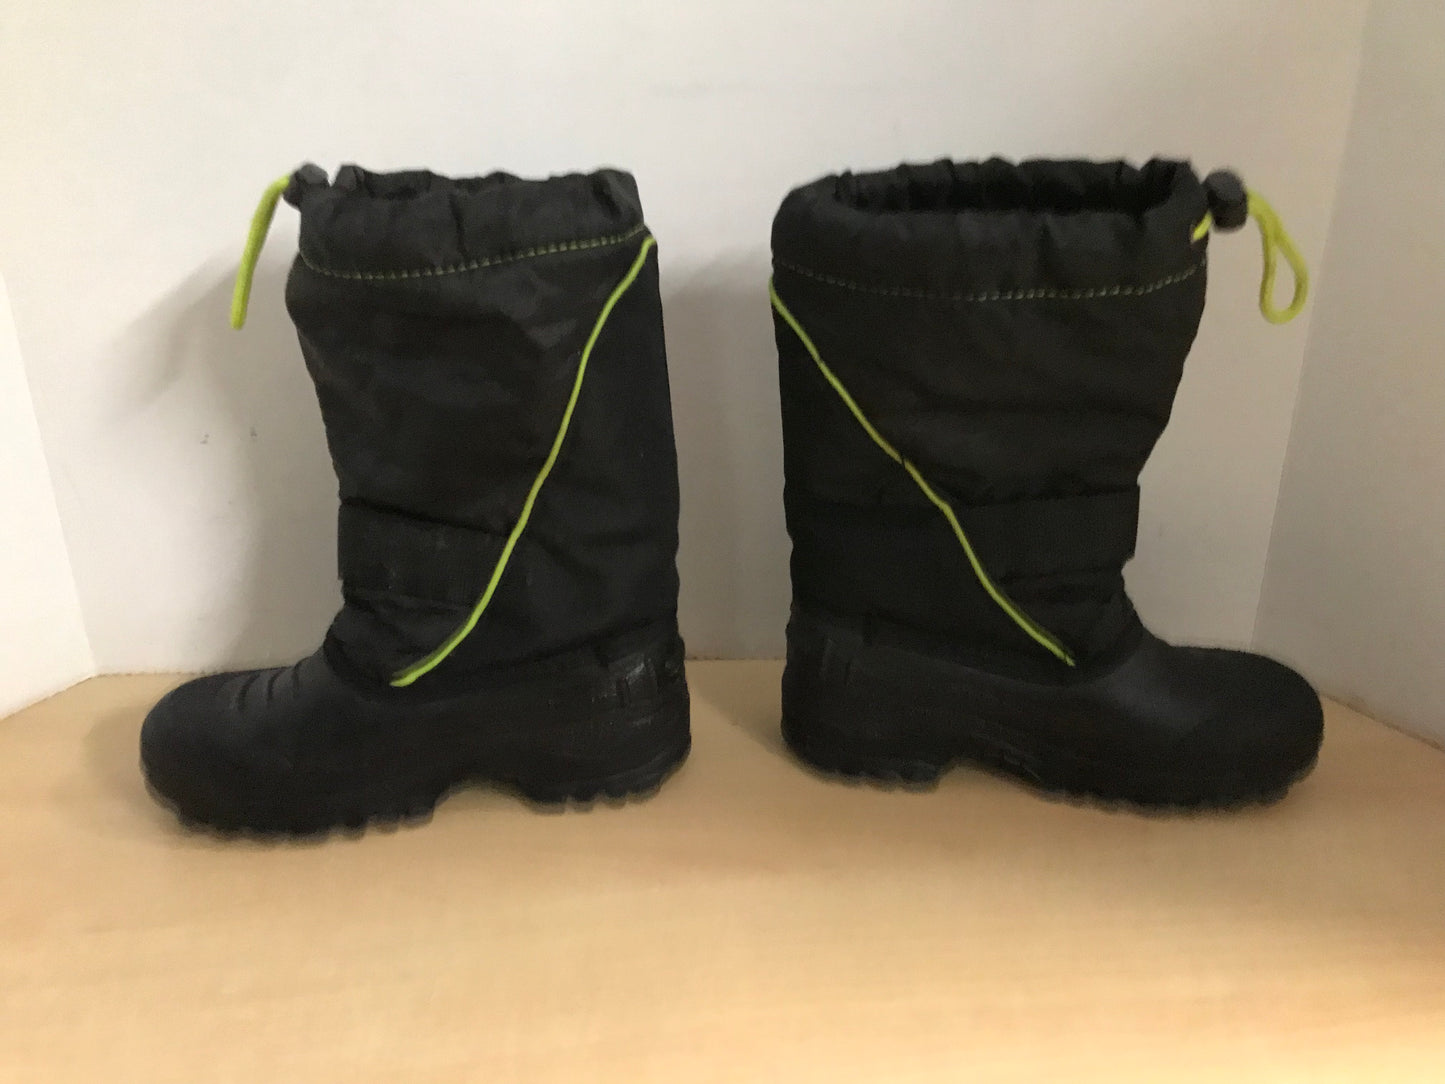 Winter Boots Child Size 1 Weather Spirits With Liner Black Lime